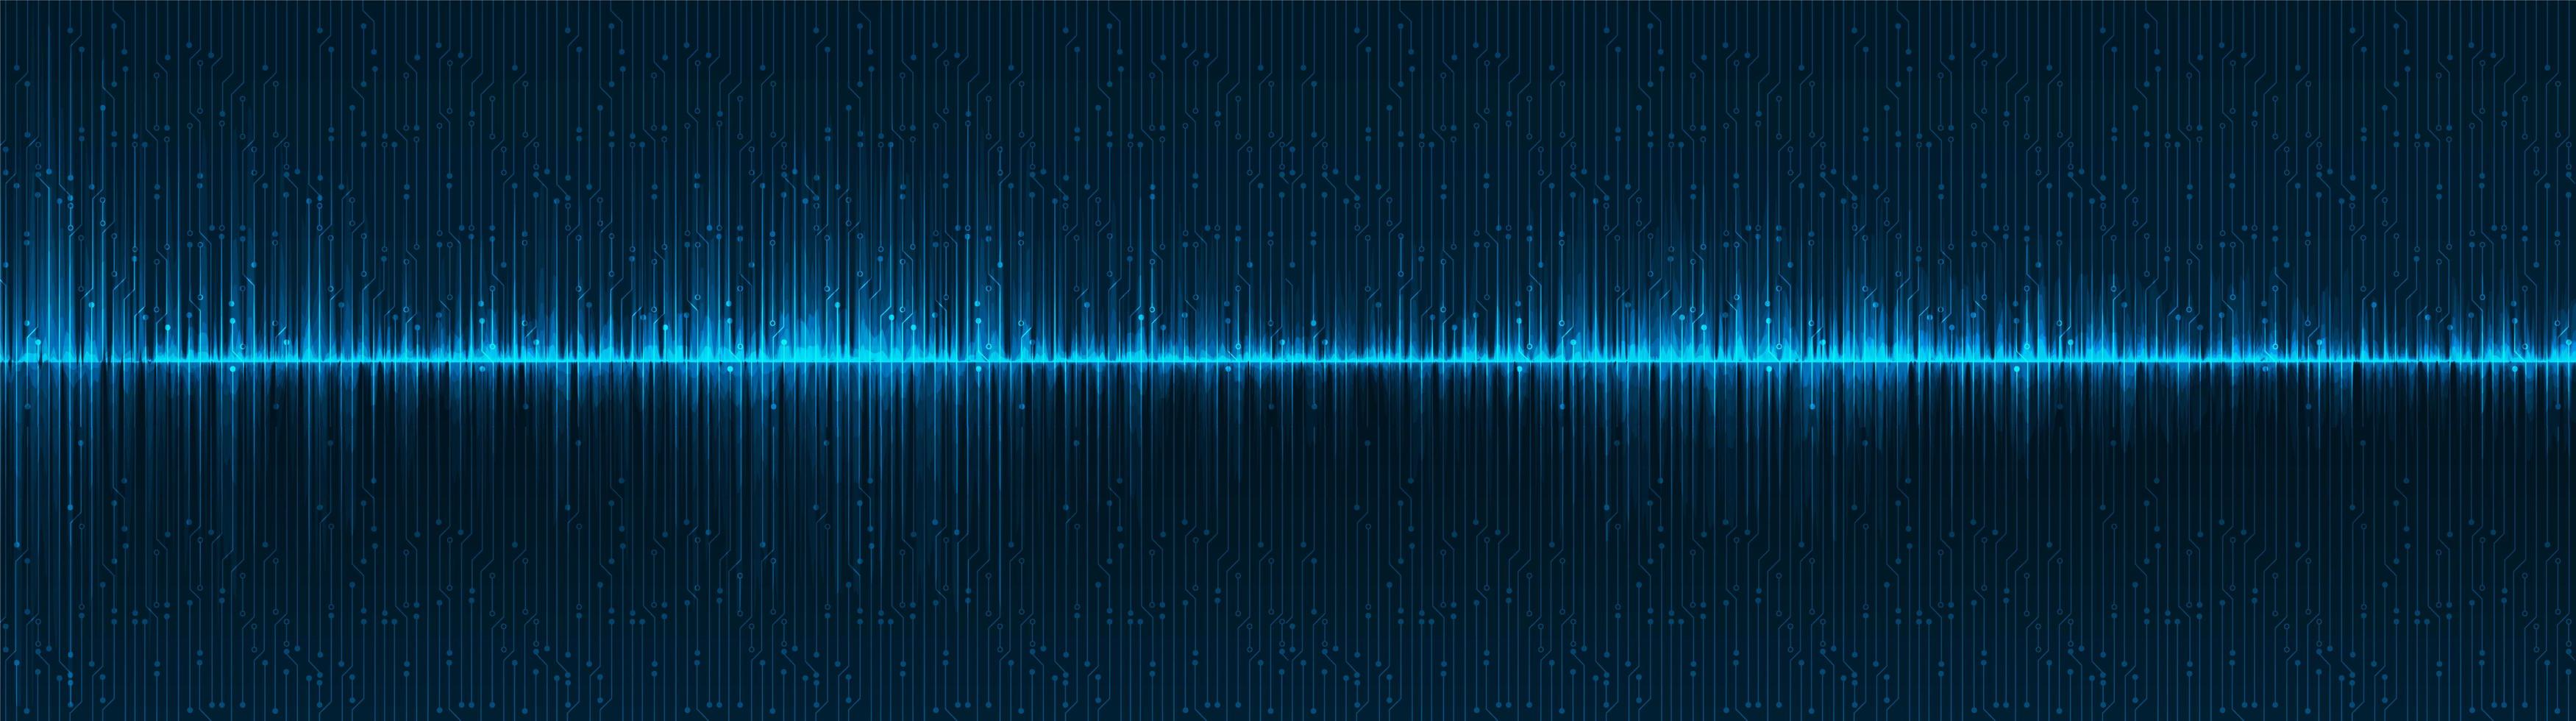 Panorama Digital Sound Wave Background,technology and earthquake wave diagram concept,design for music studio and science,Vector Illustration. vector